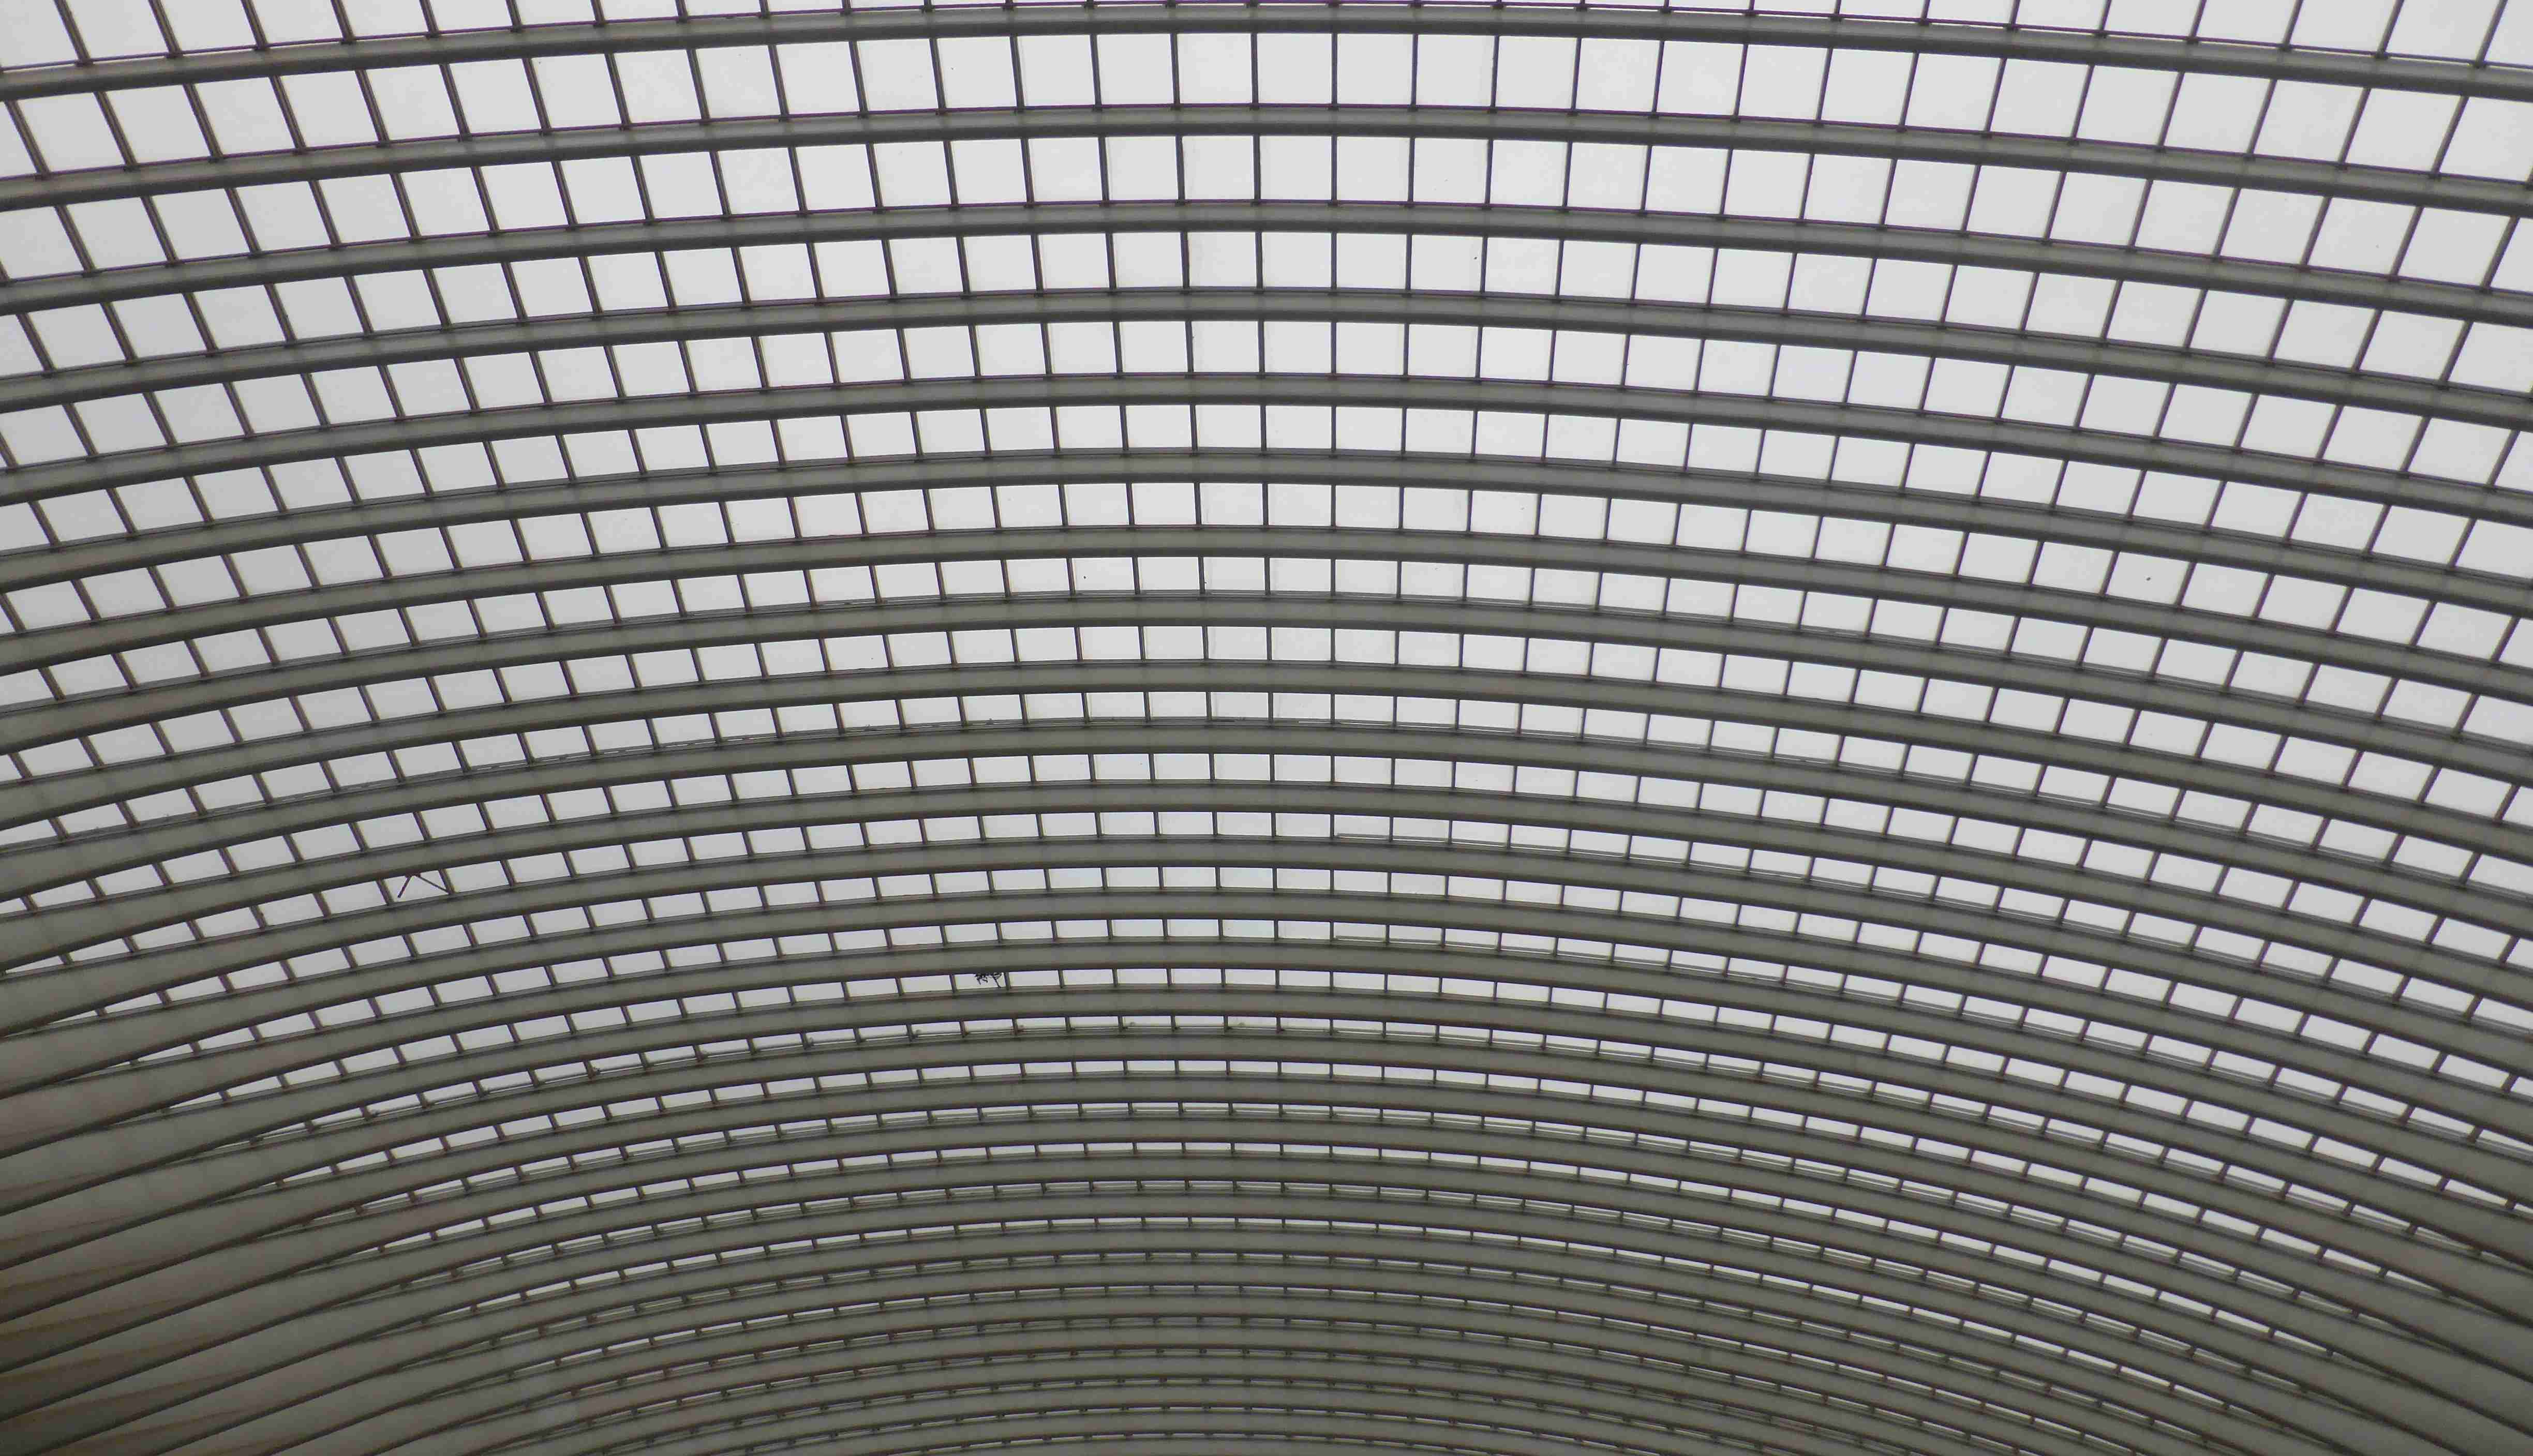 A detail of the roof, made of steel, glass and white concrete